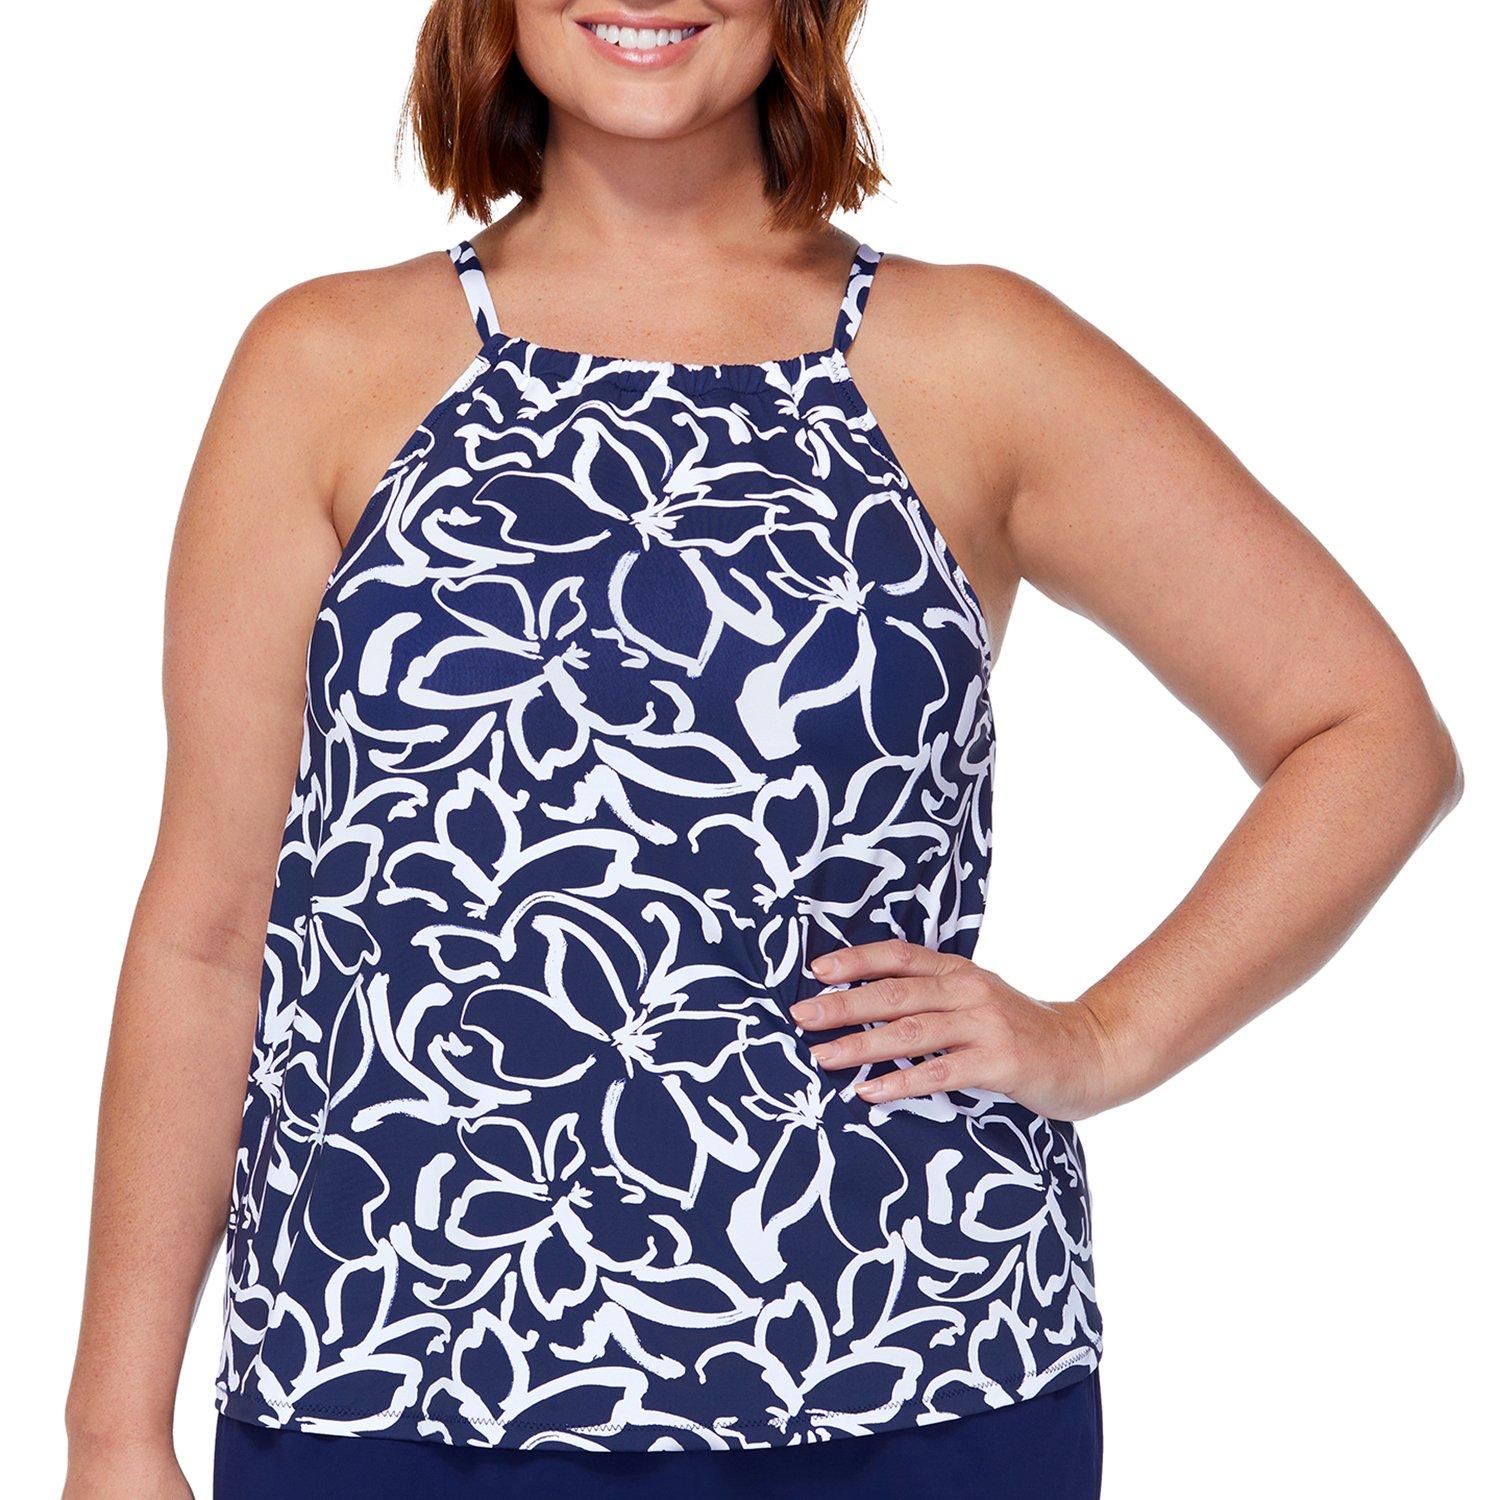 Get ready for the pool with plus size one-piece swimsuits and swim